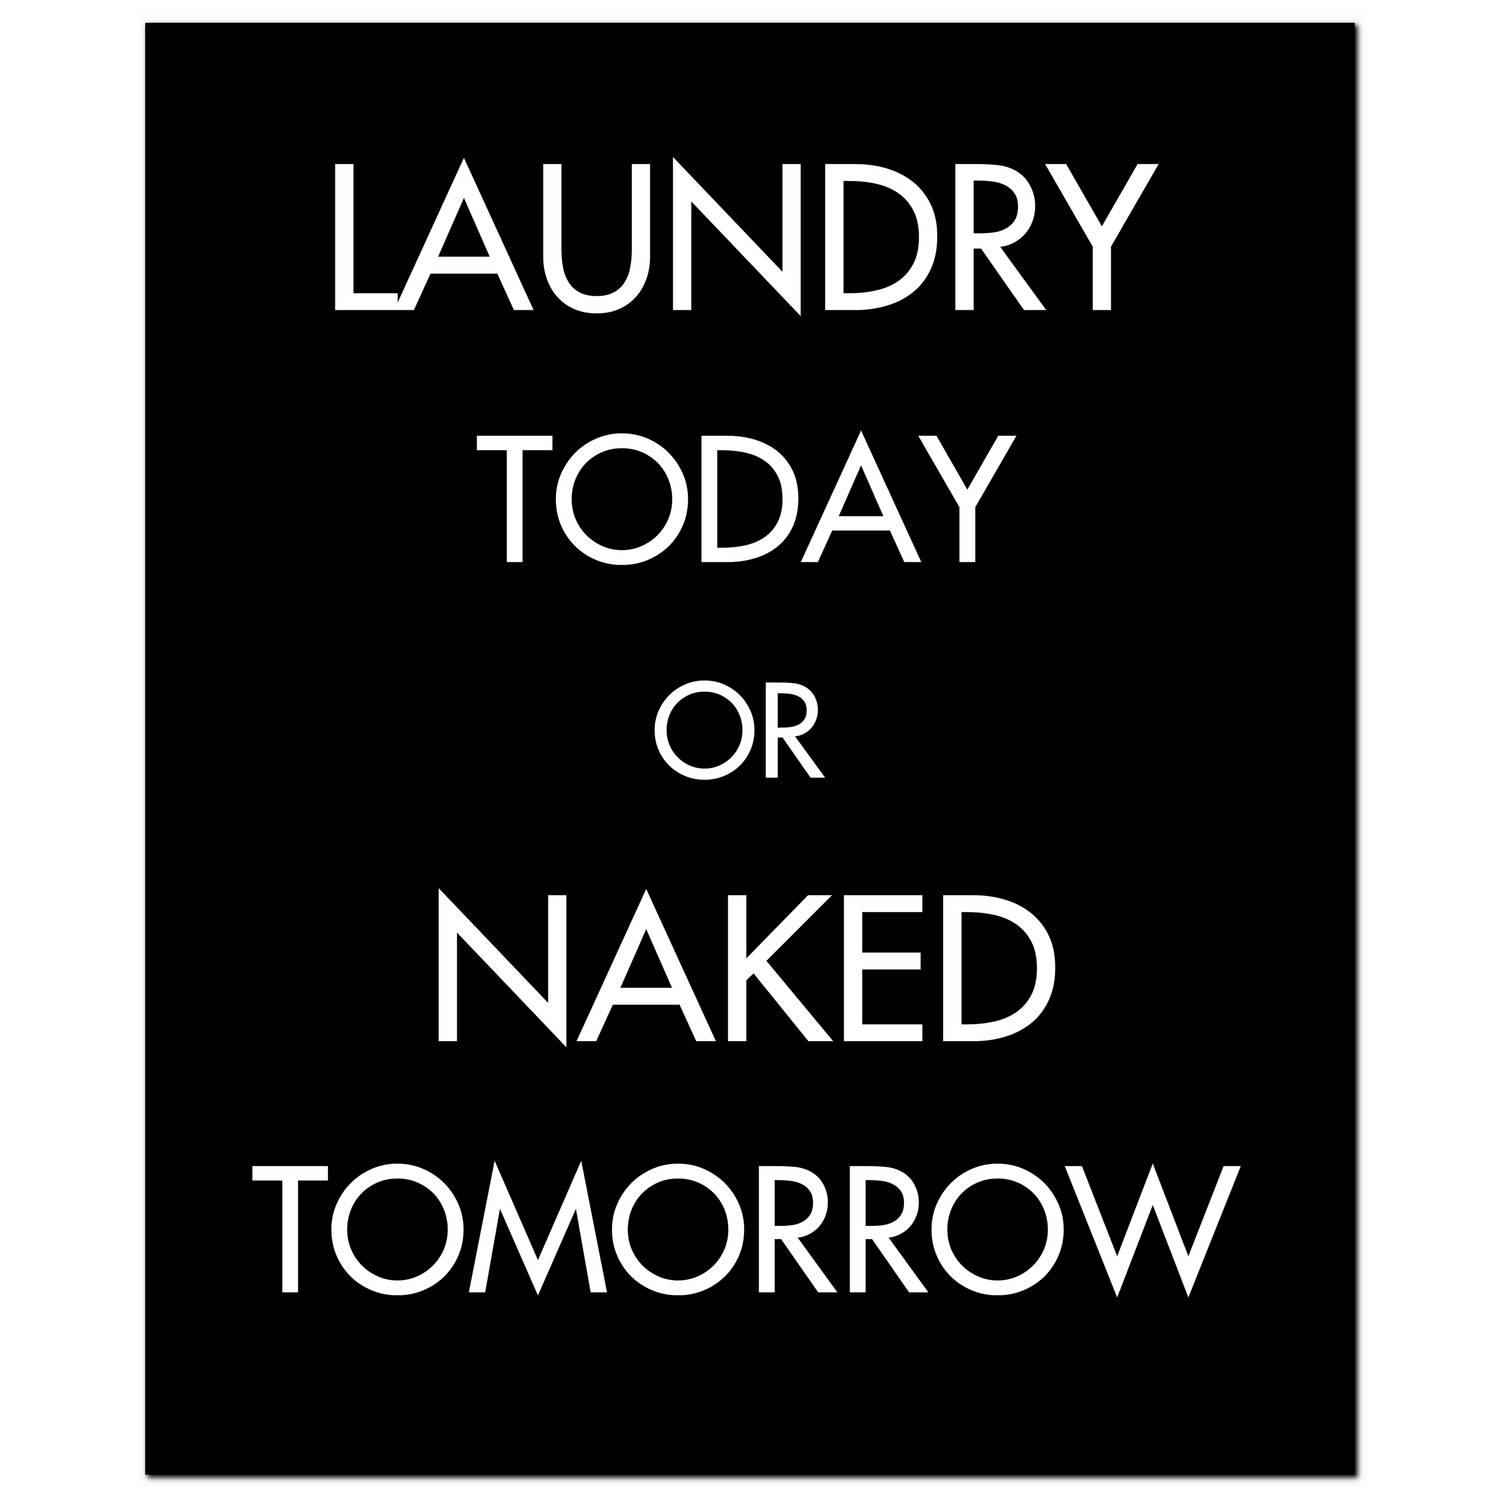 Laundry Today Or Naked Tomorrow Silver Foil Plaque - Image 1